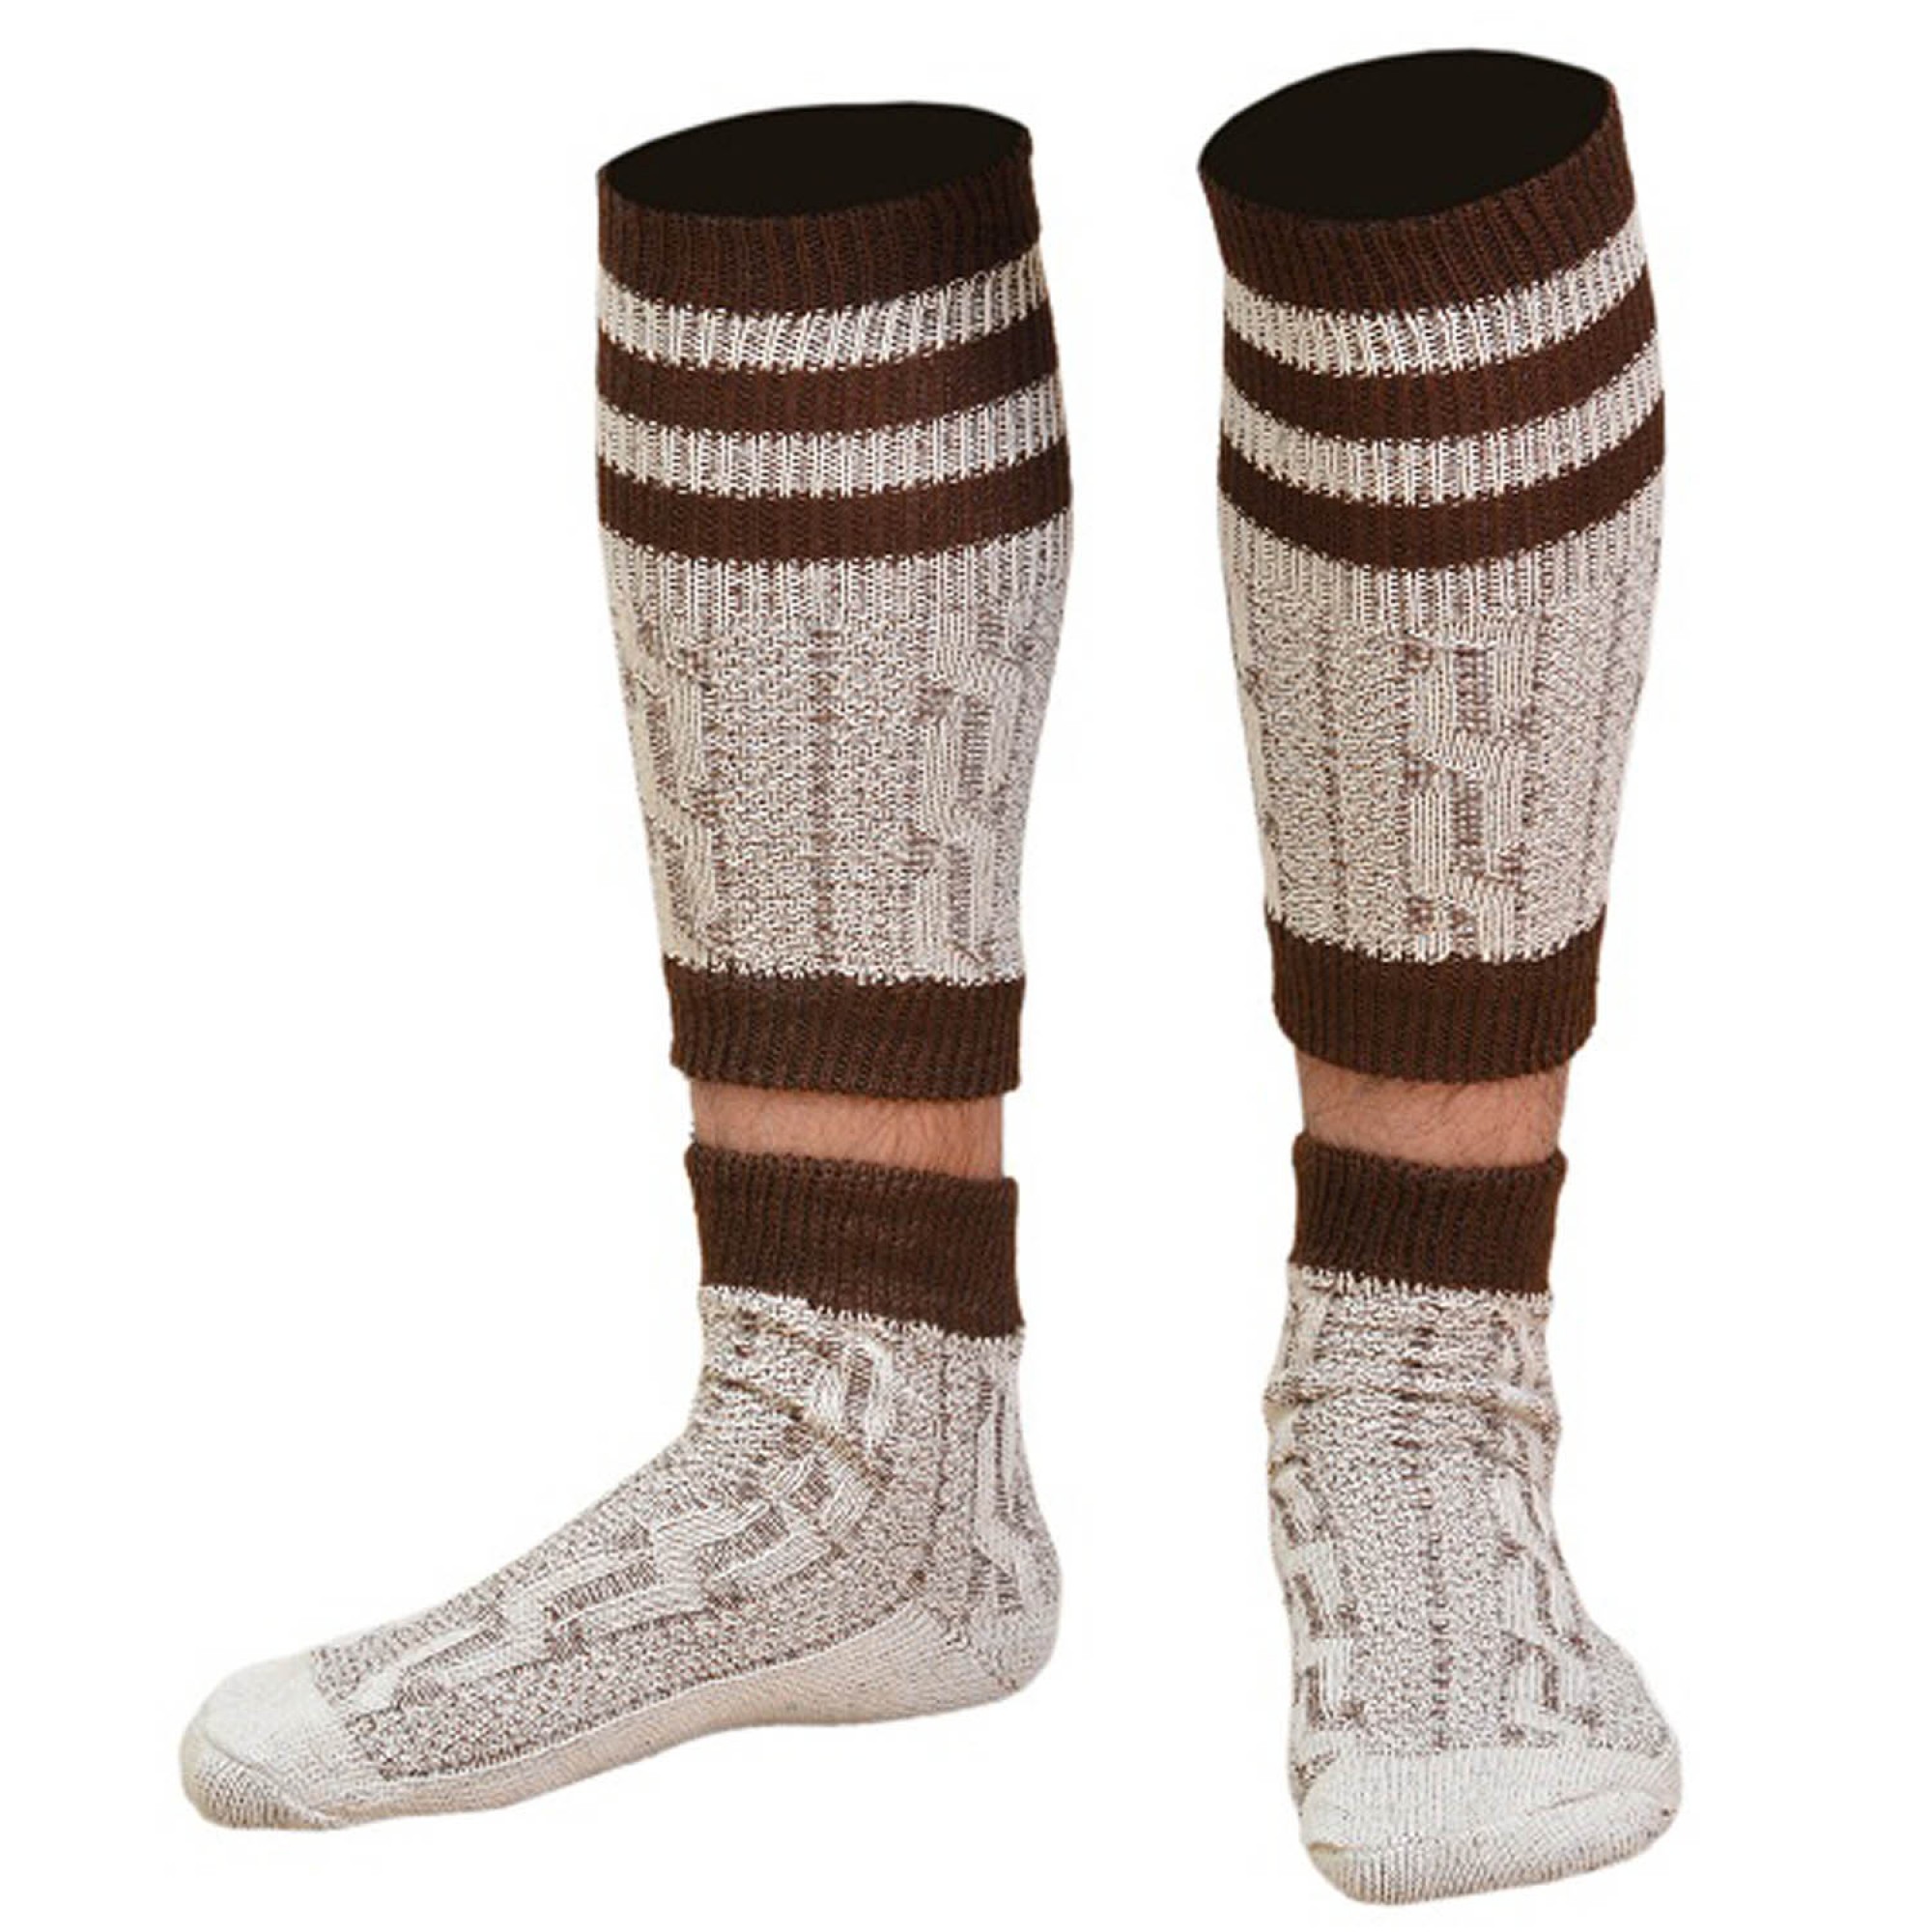 Traditional Bavarian Calf Socks loferl handknitted / Production on Order  Entry 